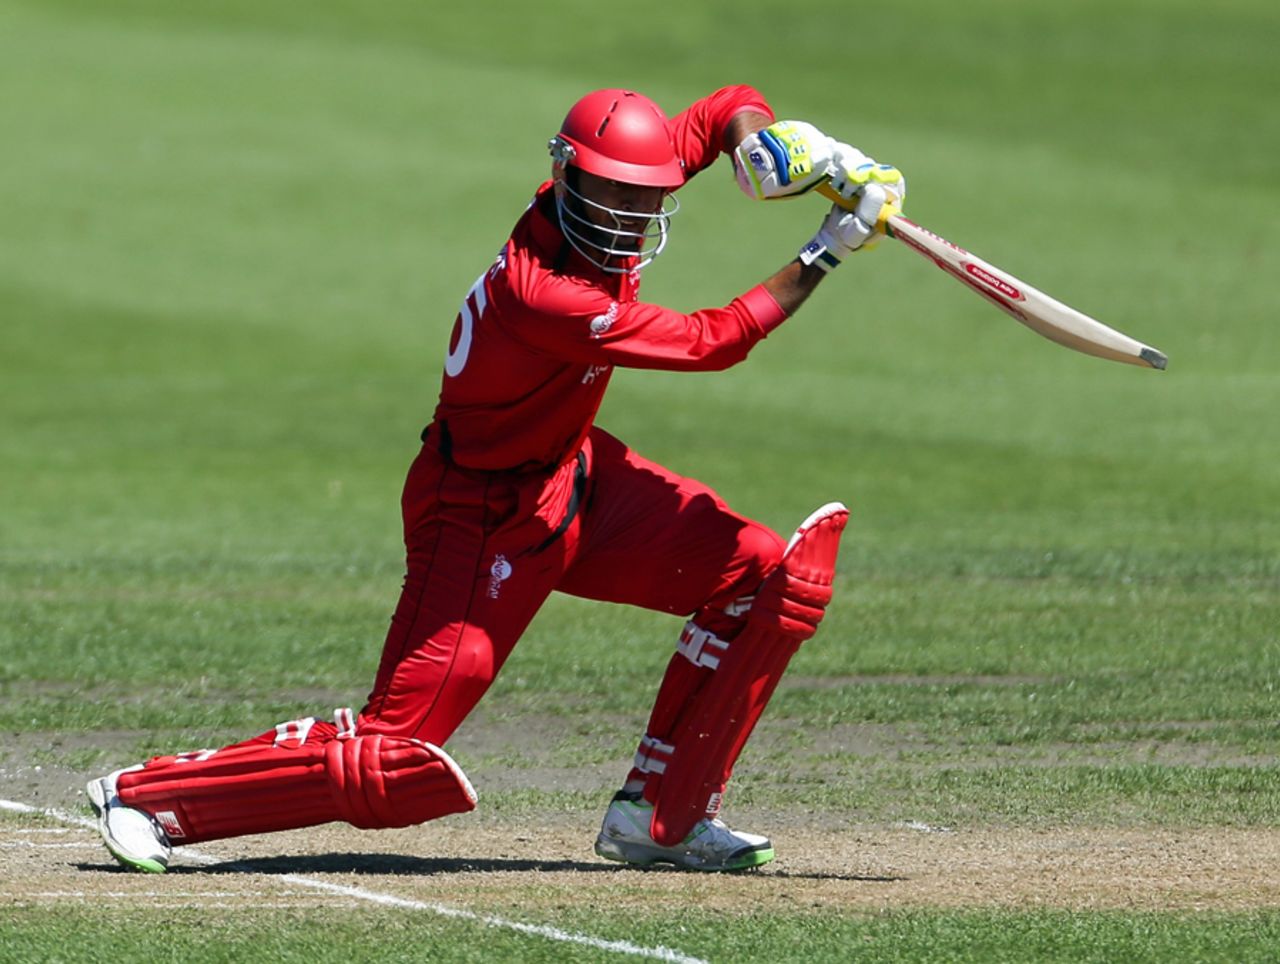 Nizakat Khan of Hong Kong bats during the ICC Cricket World Cup Qualifier match between Namibia and Hong Kong at Mainpower Oval on January 28, 2014 in Rangiora, New Zealand. (Photo by Martin Hunter-IDI/IDI via Getty Images)